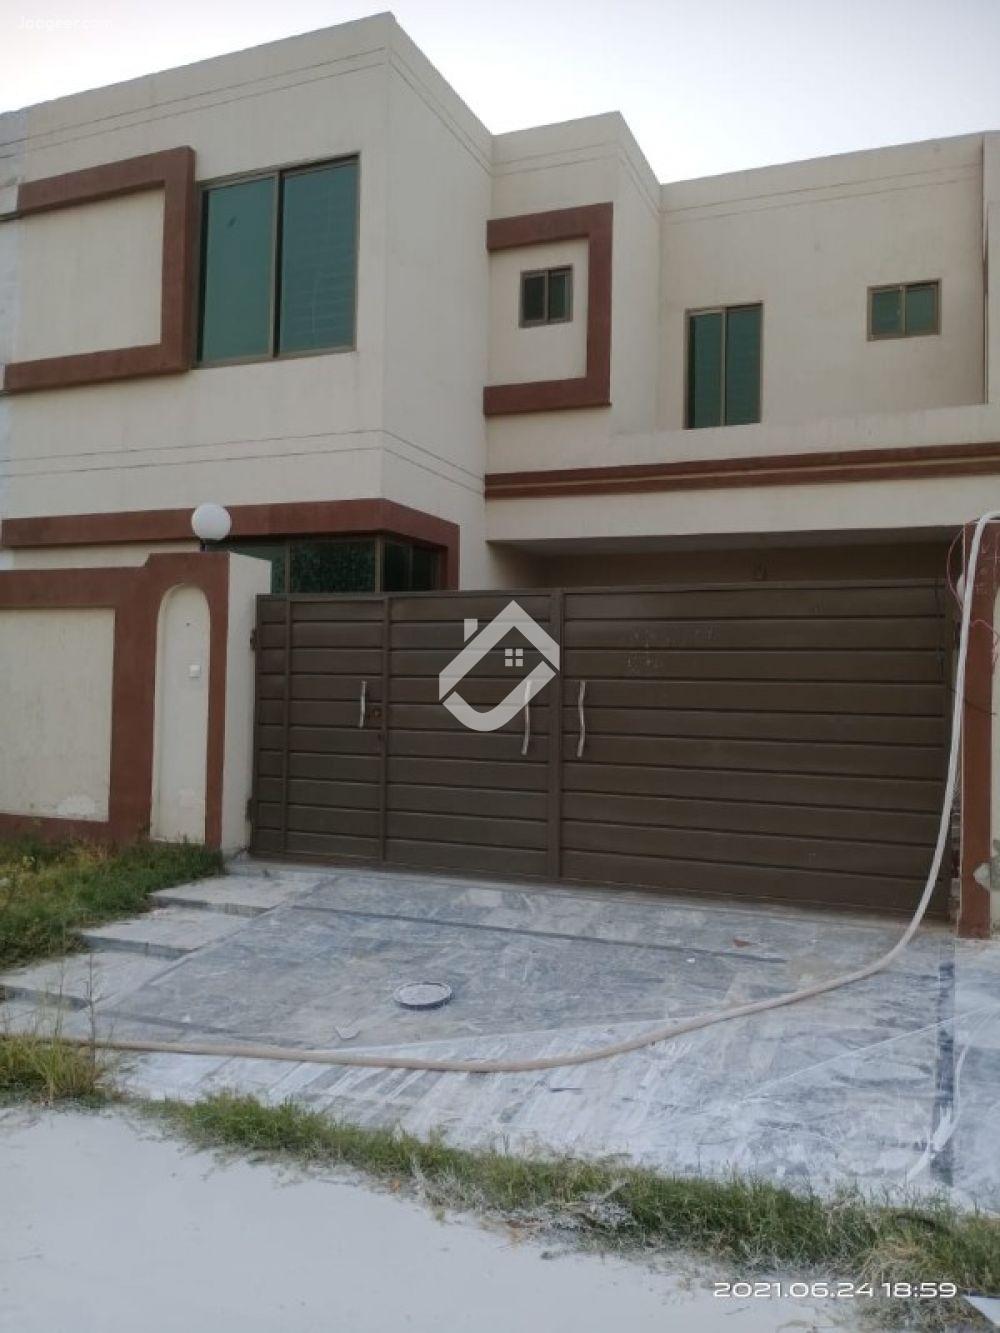 View  7 Marla Double Storey House Is Available For Sale In Lahore Motorway City in Lahore Motorway City, Lahore